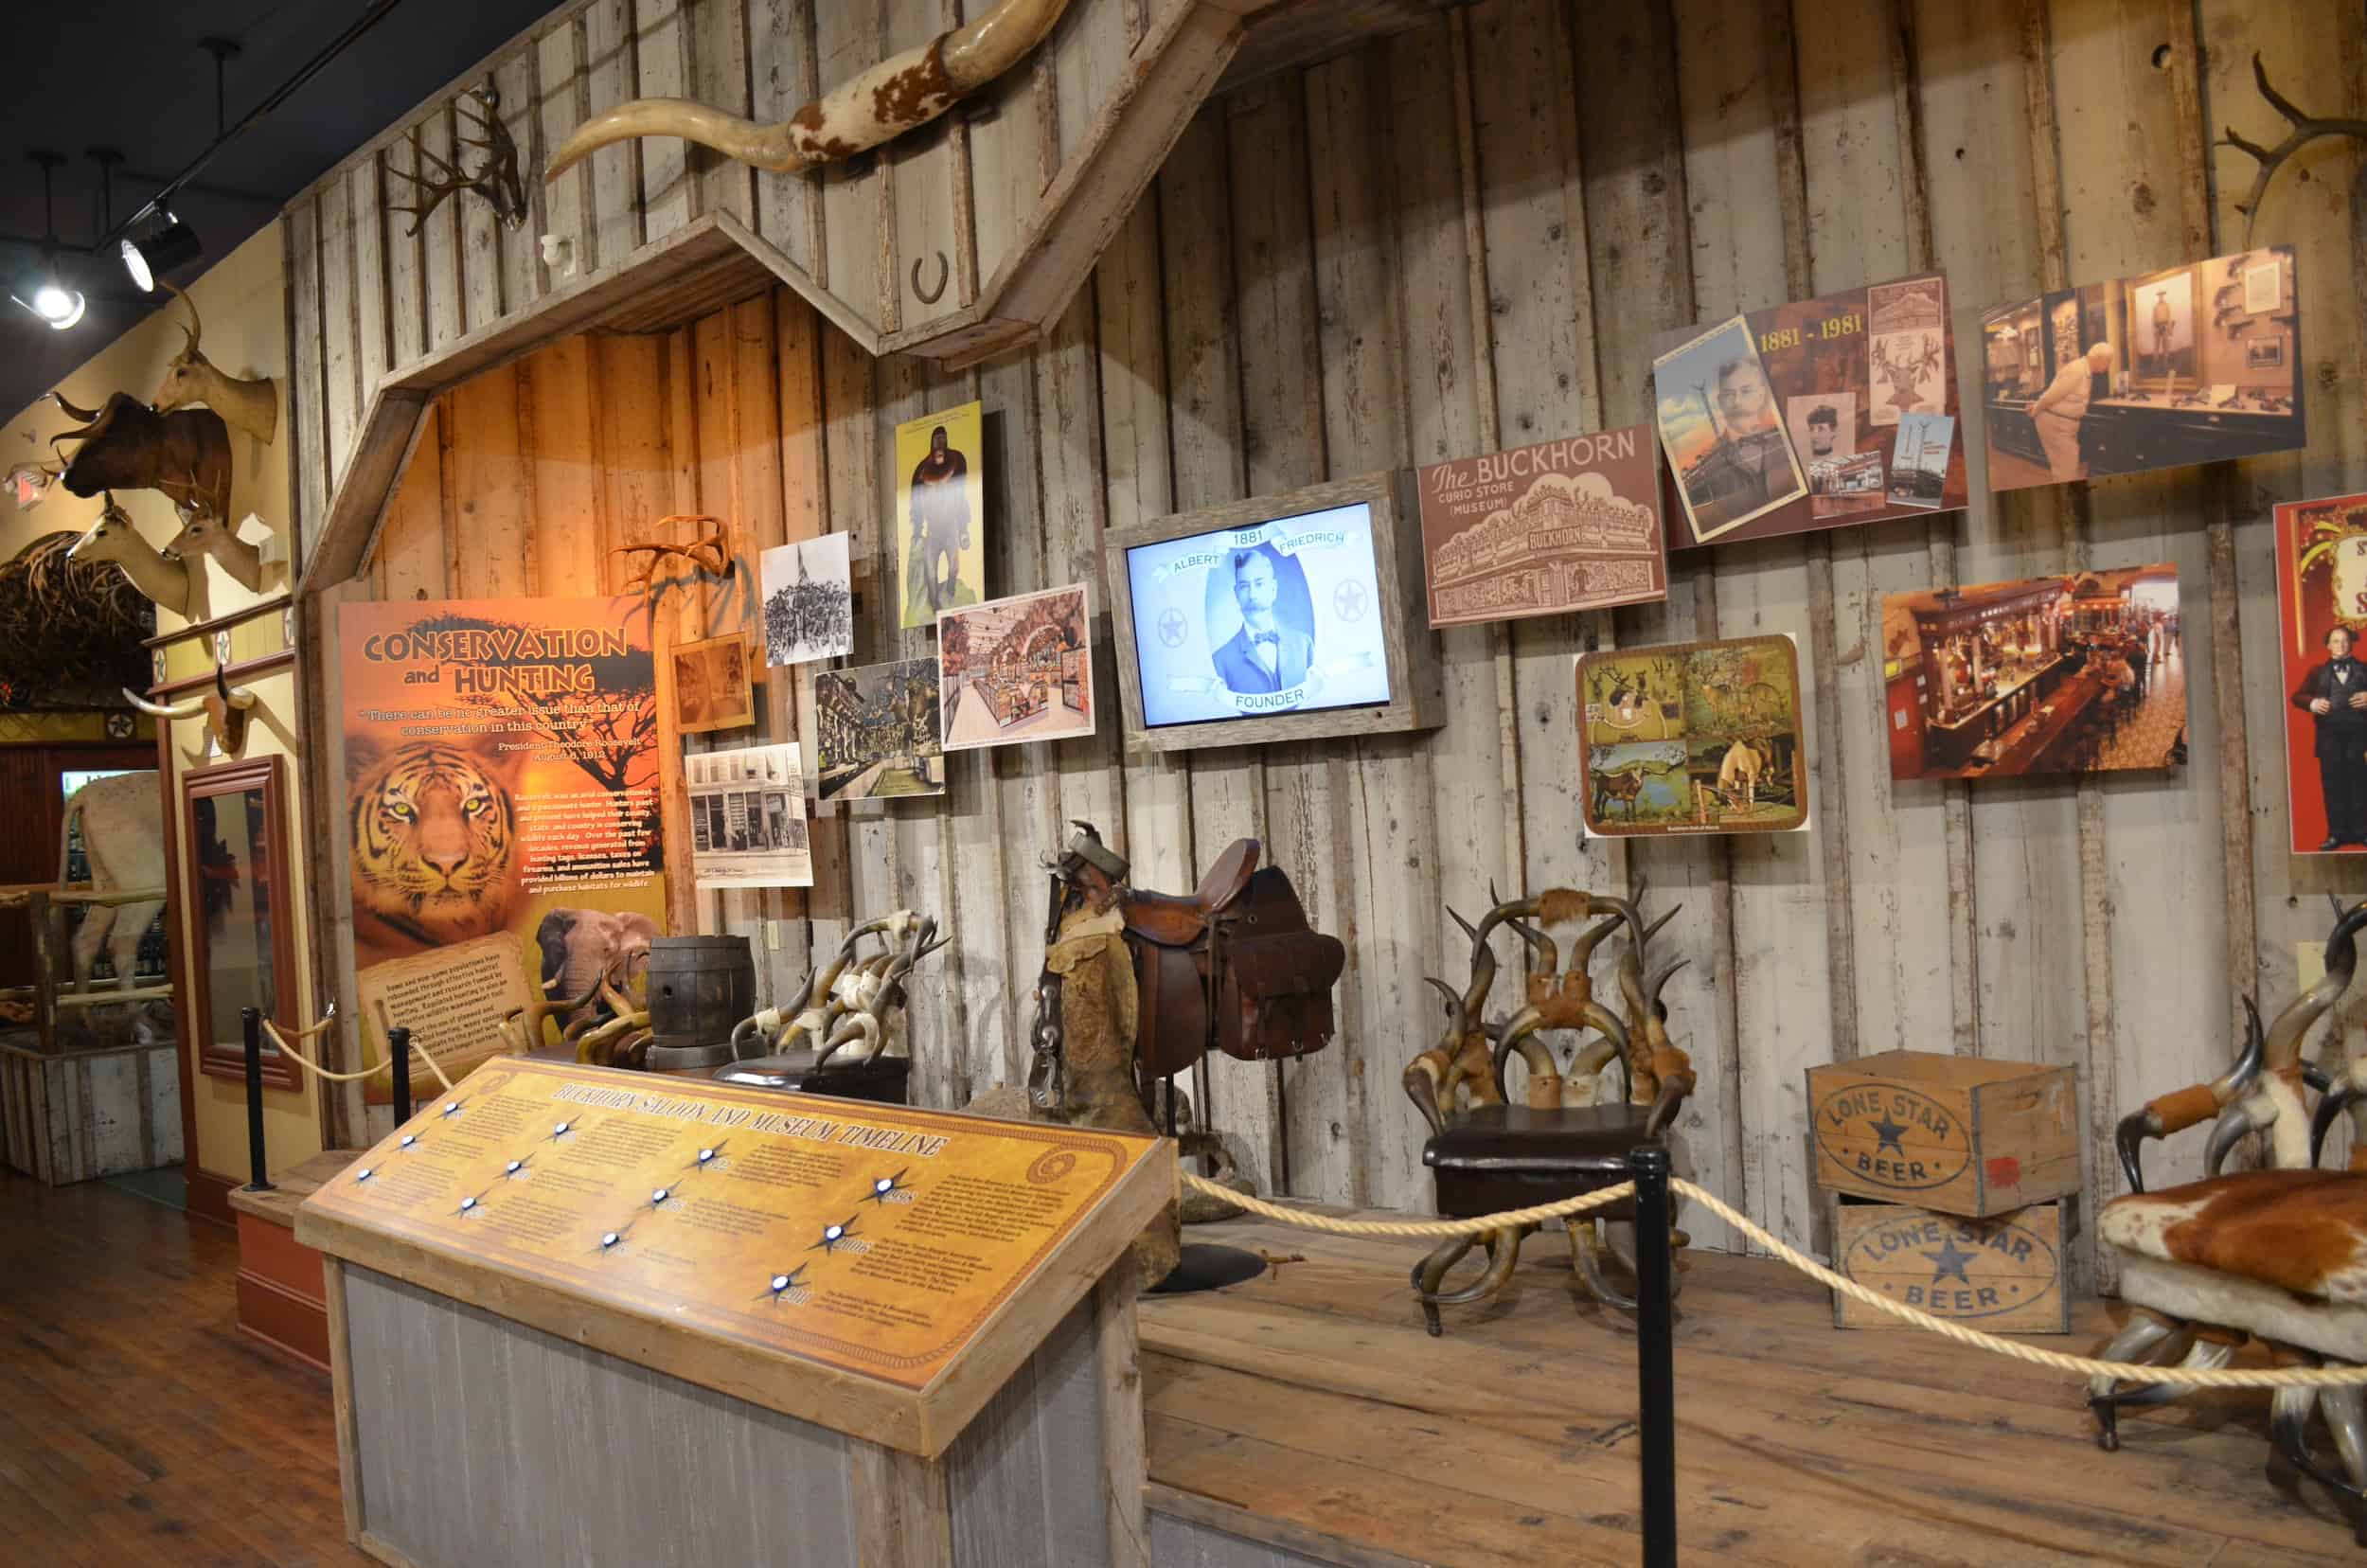 Conservation and hunting at the Buckhorn Museum in San Antonio, Texas